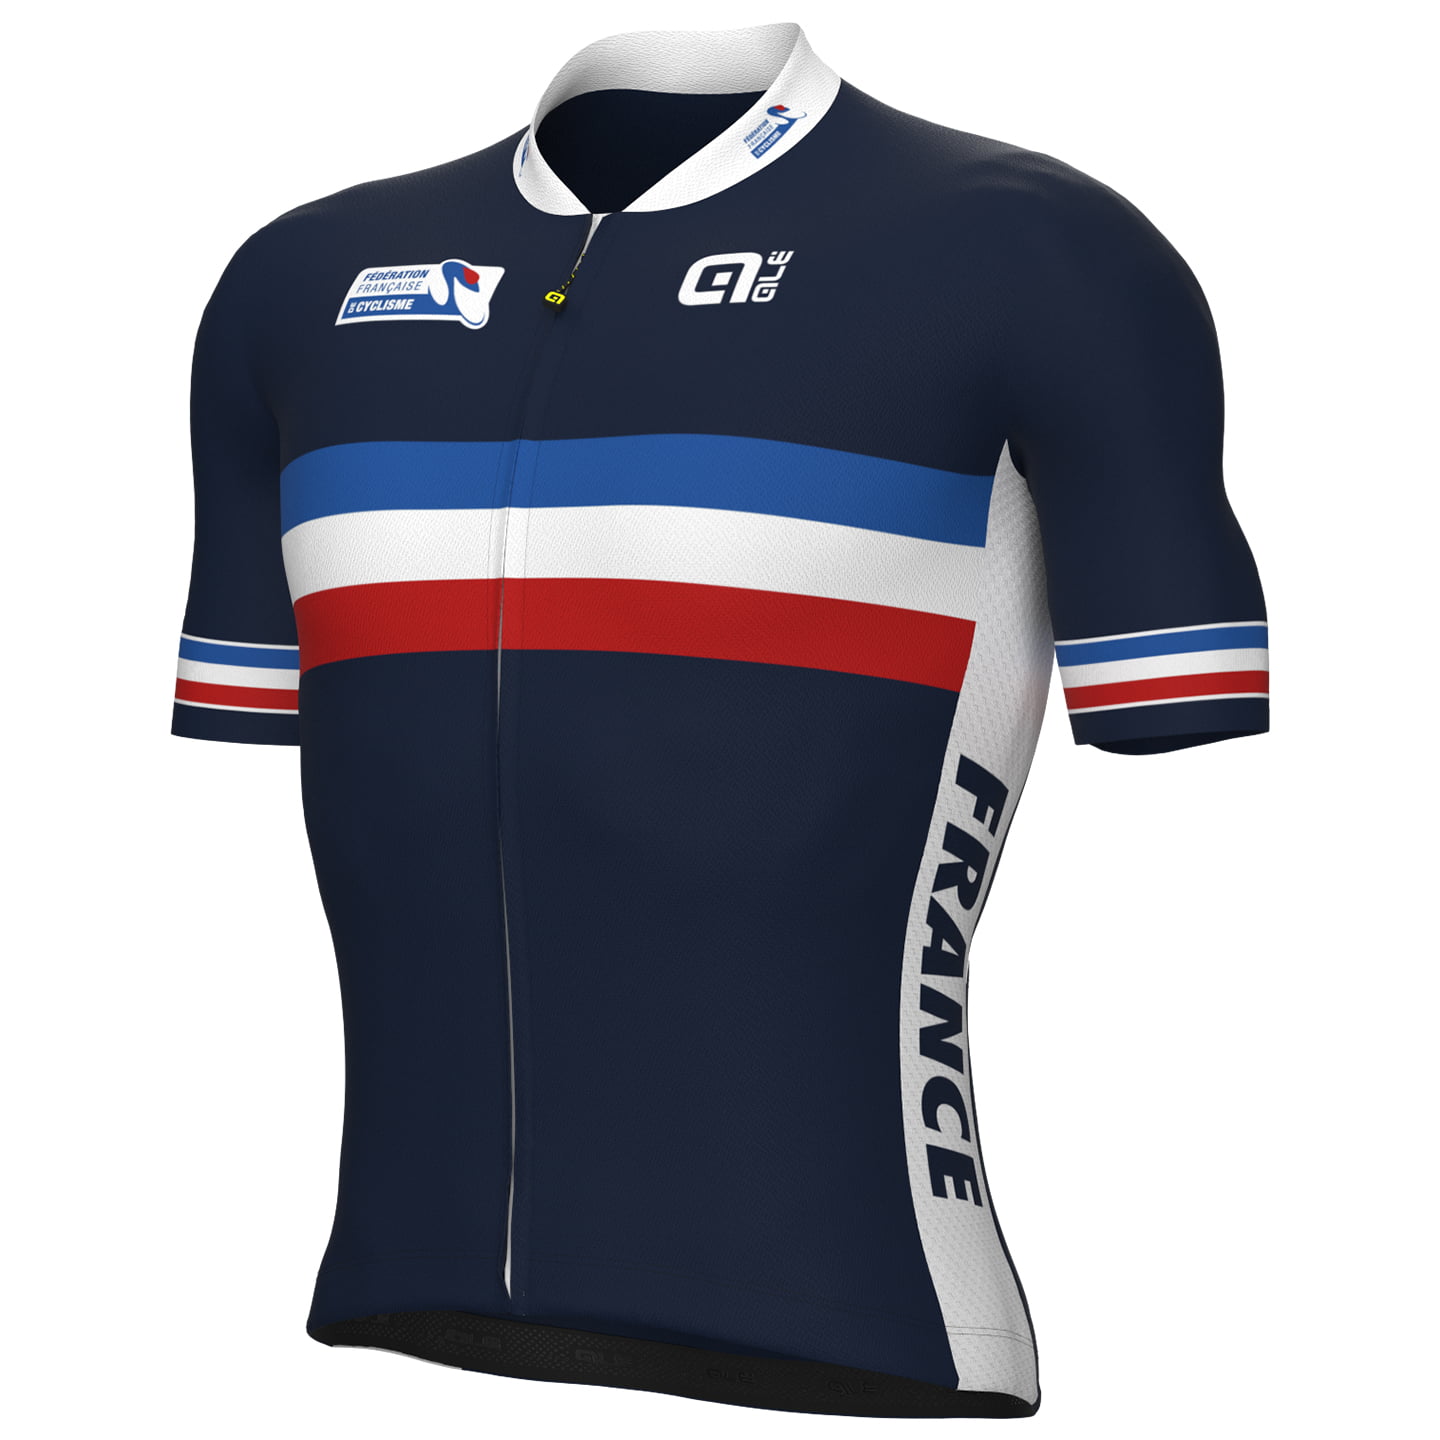 FRENCH NATIONAL TEAM 2022 Short Sleeve Jersey, for men, size XL, Bike Jersey, Cycle gear